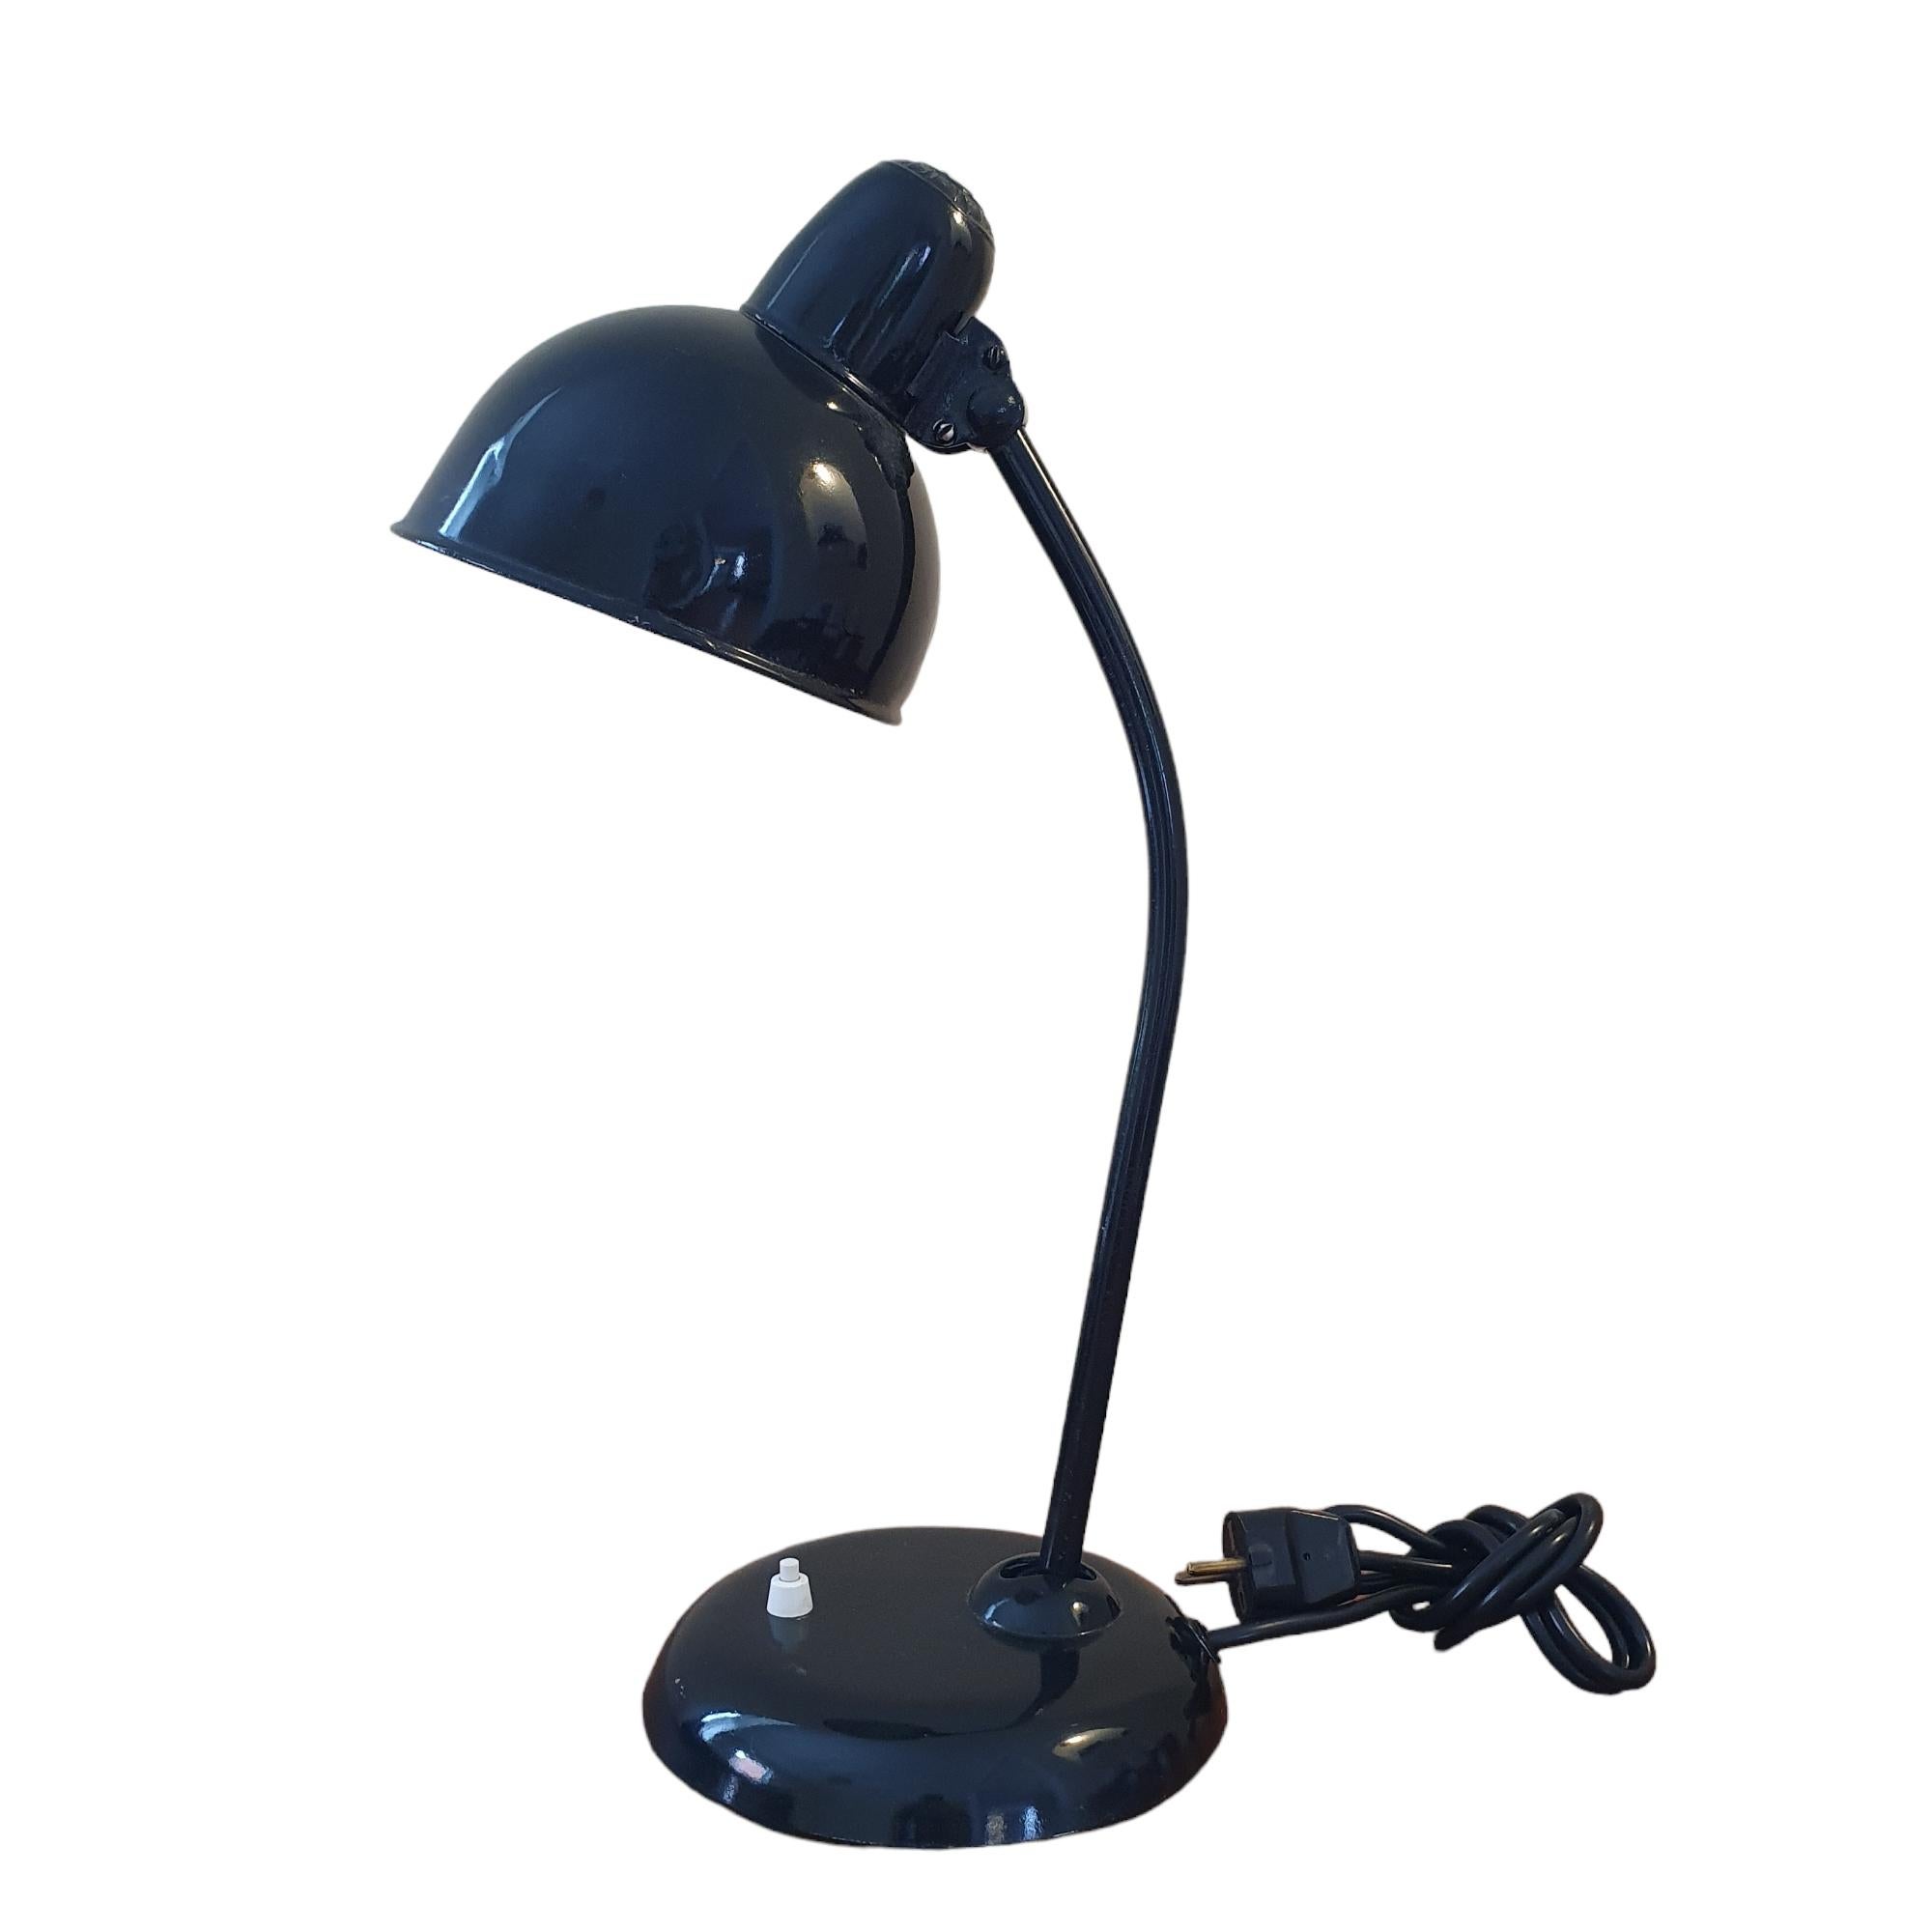 Beautiful Black 1930's Kaiser Idell table lamp. The model no. 6556 is one of the most famous table lamps in the world. Designed by Christian Dell it is typical for its time and has become an icon and almost a symbol of the German Bauhaus era. Black